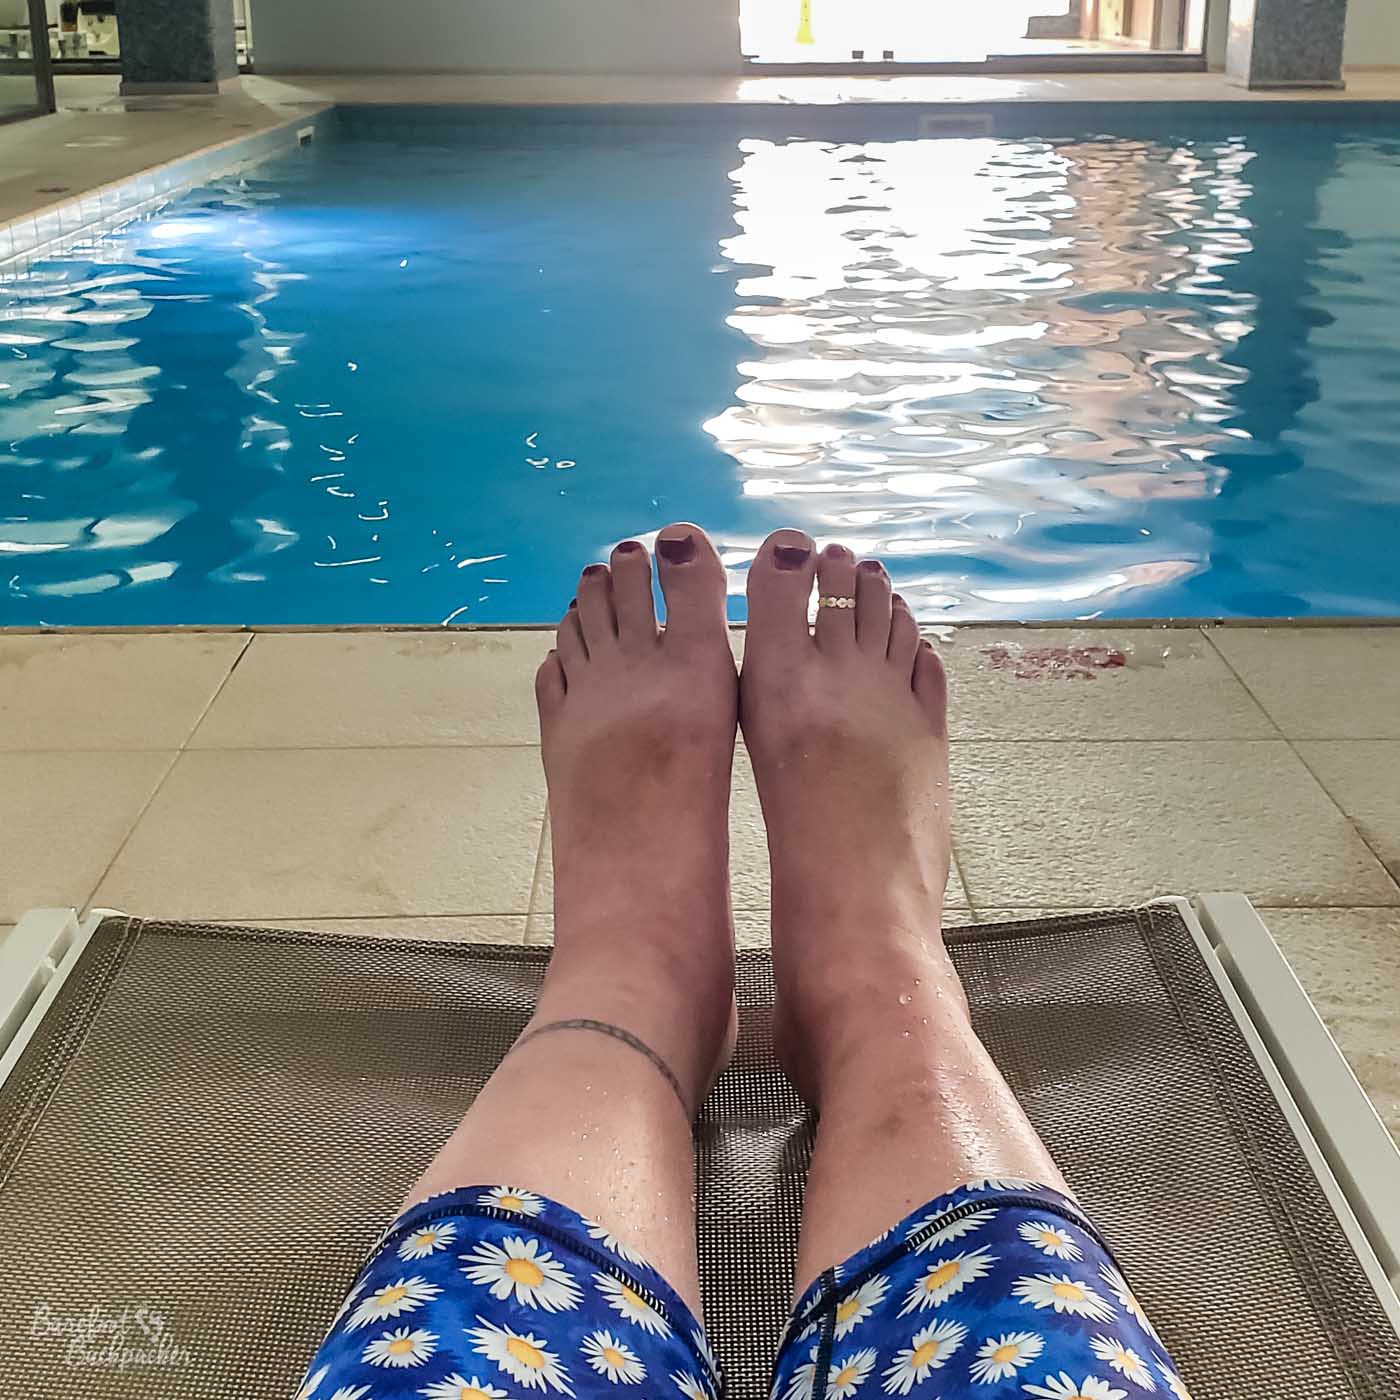 Lower legs (partly covered in daisy print leggings) and feet (bare aside from purple painted toenails) are reclining on a mesh seat; there is an indoor pool in the background.